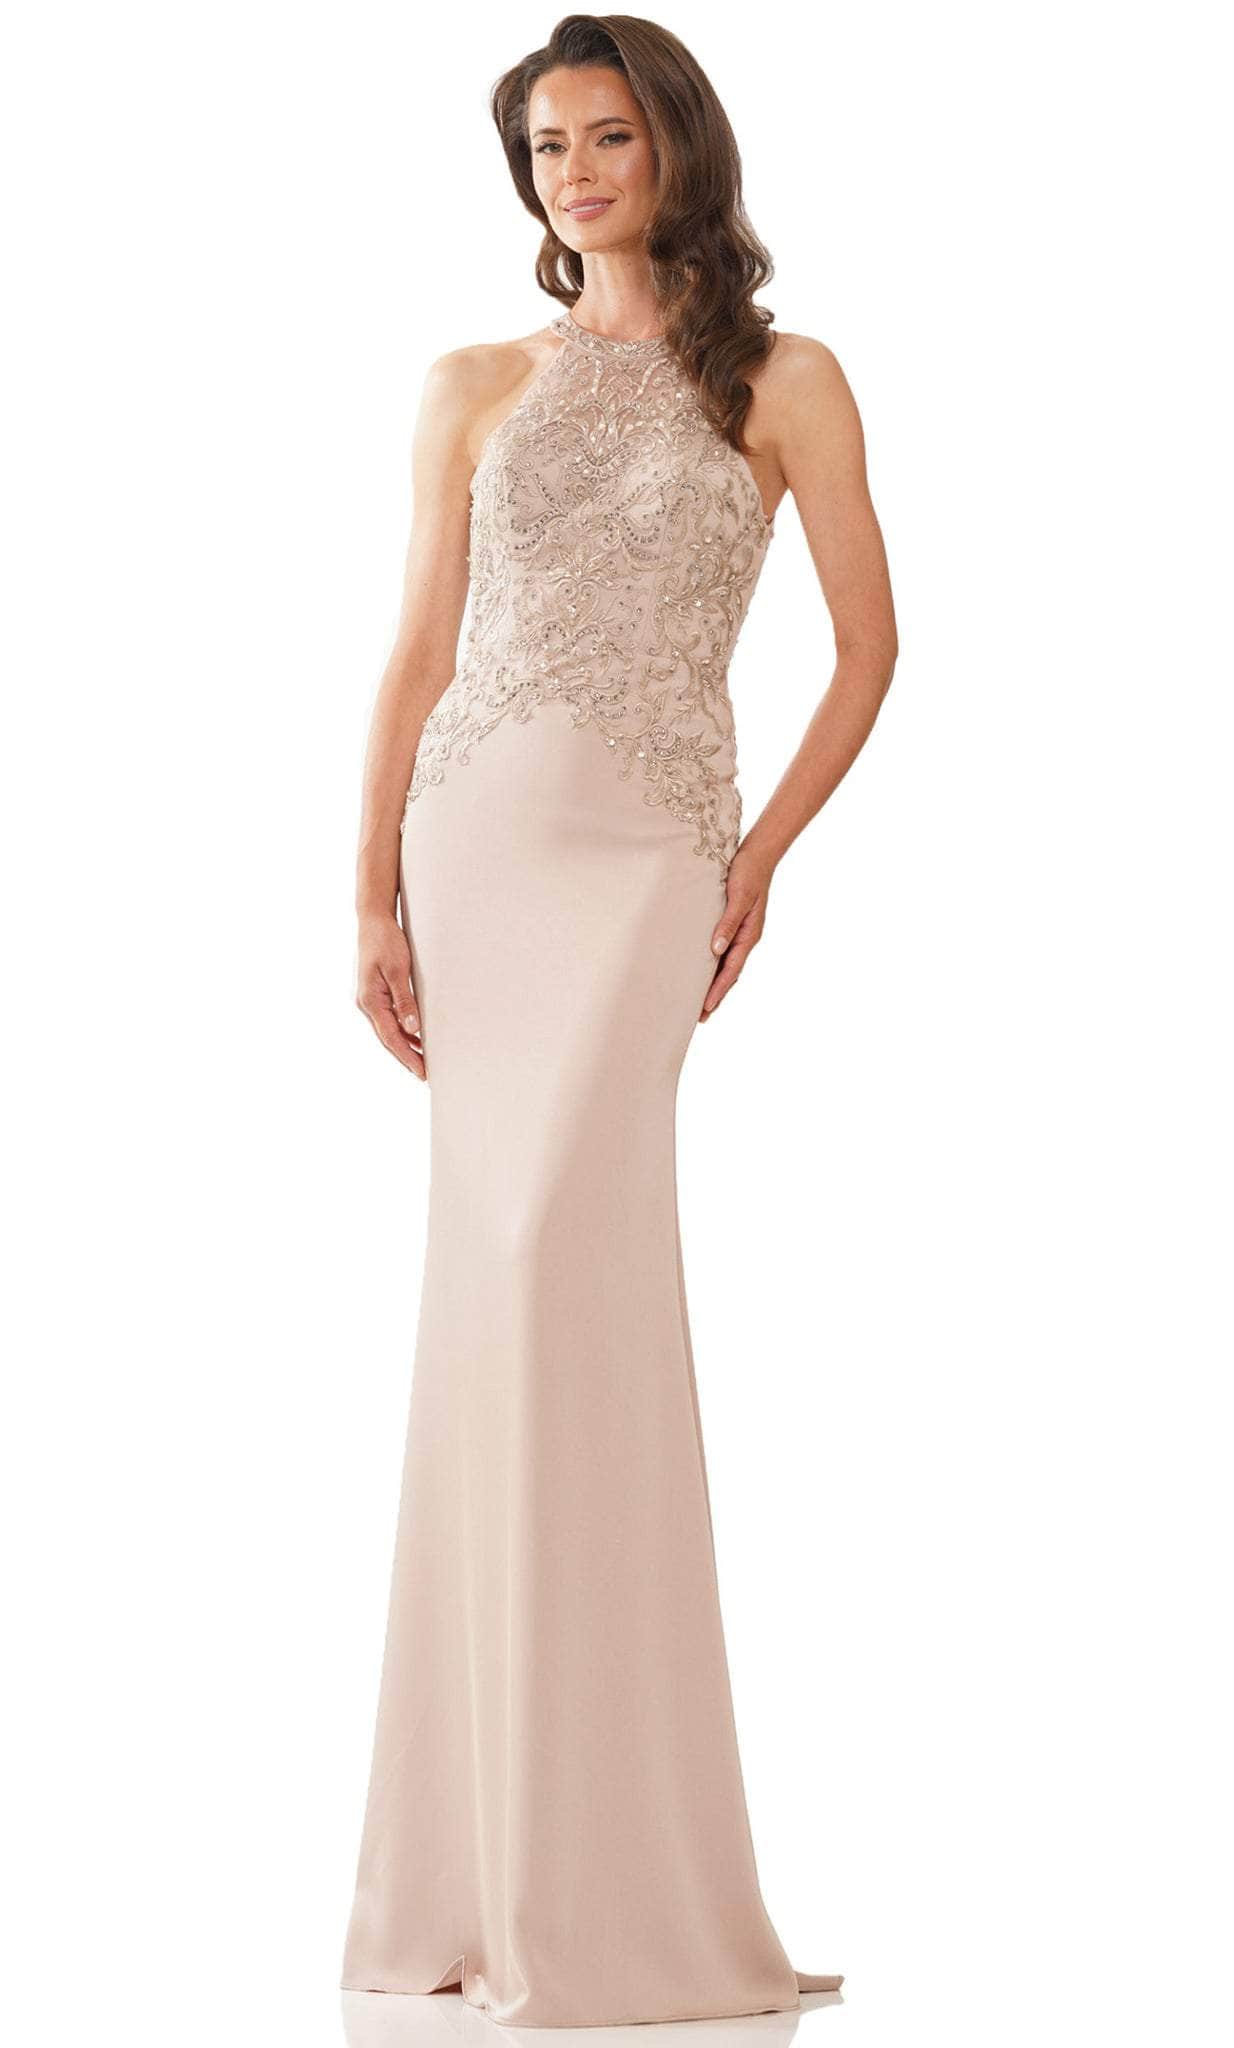 Rina di Montella RD2755 - Sleeveless Halter Neck Evening Dress Special Occasion Dress 4 / Champagne